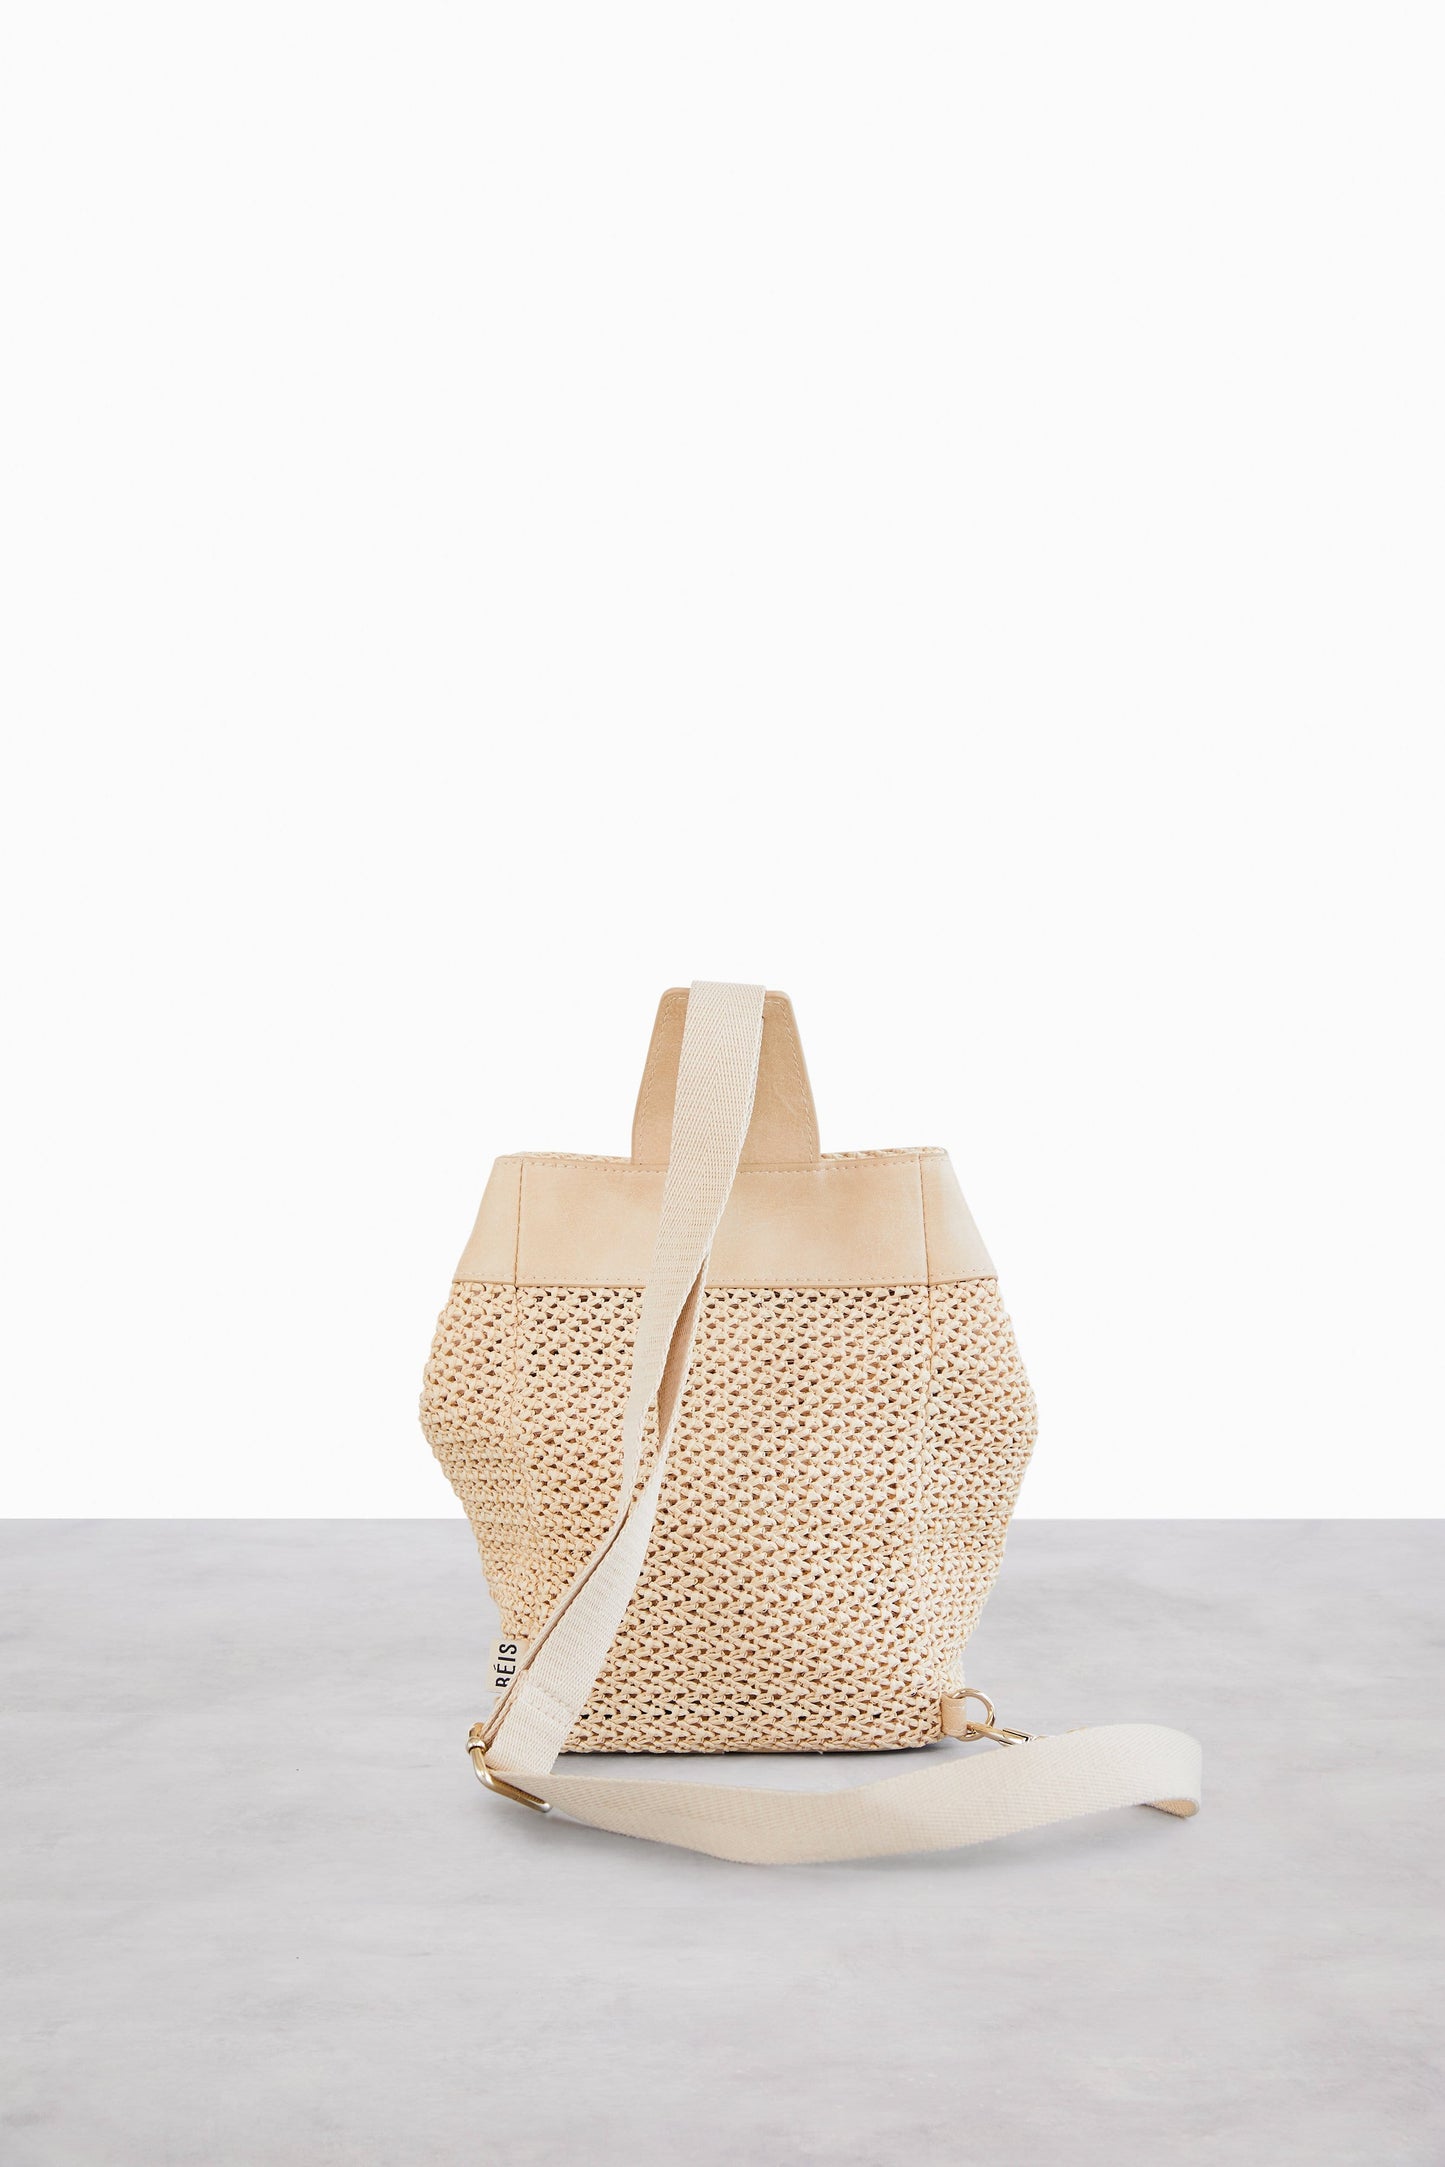 The Naturals Sling in Beige